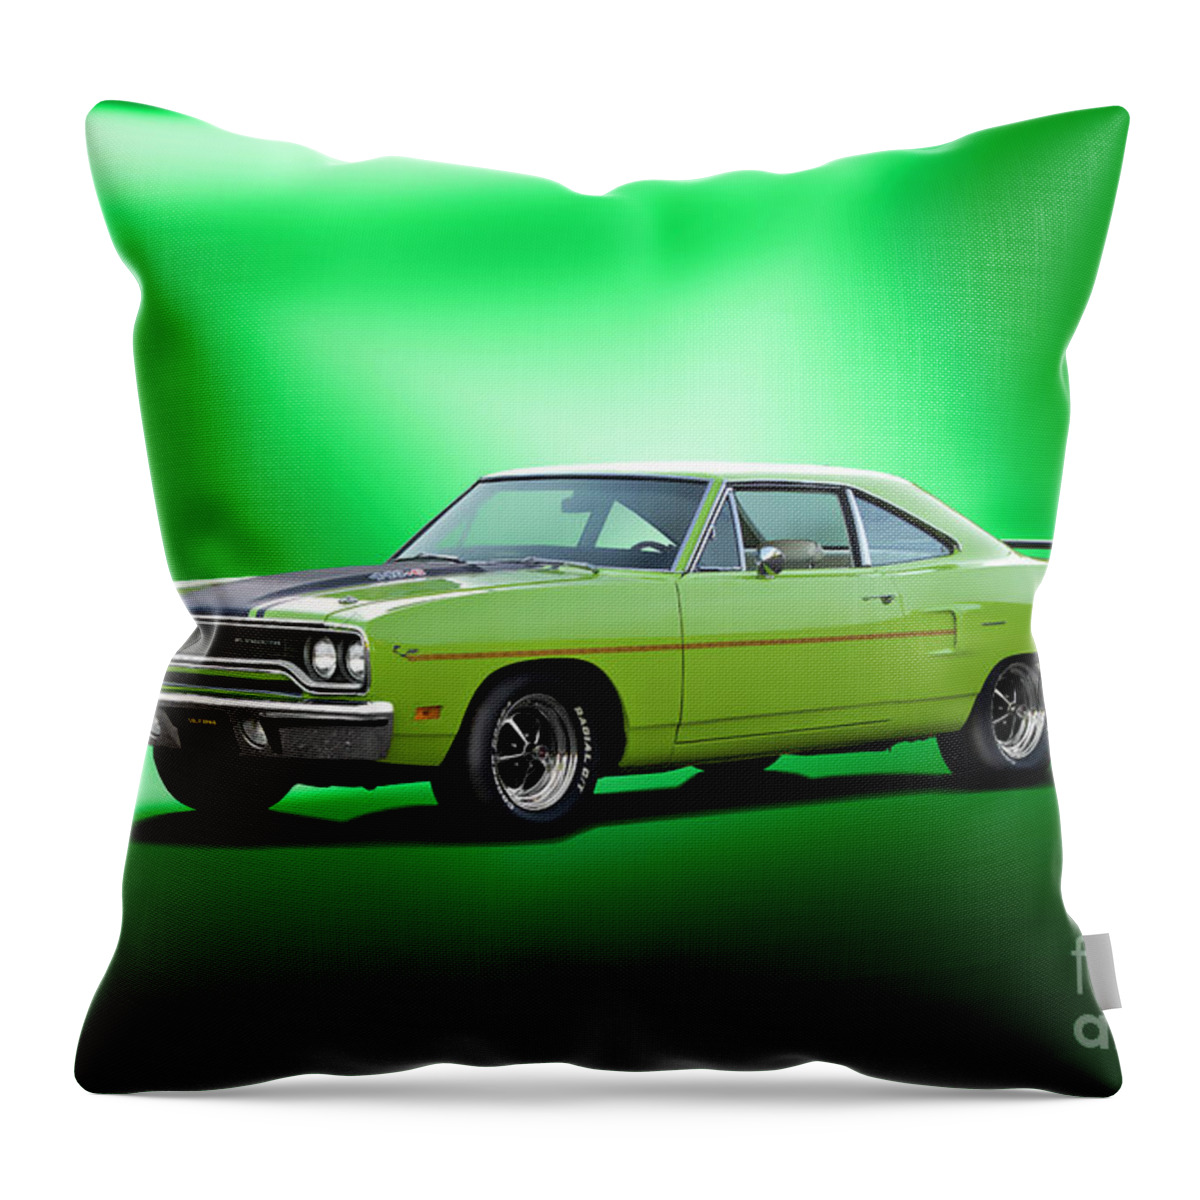 1970 Plymouth Roadrunner 440 Throw Pillow featuring the photograph 1970 Plymouth Roadrunner 440 by Dave Koontz